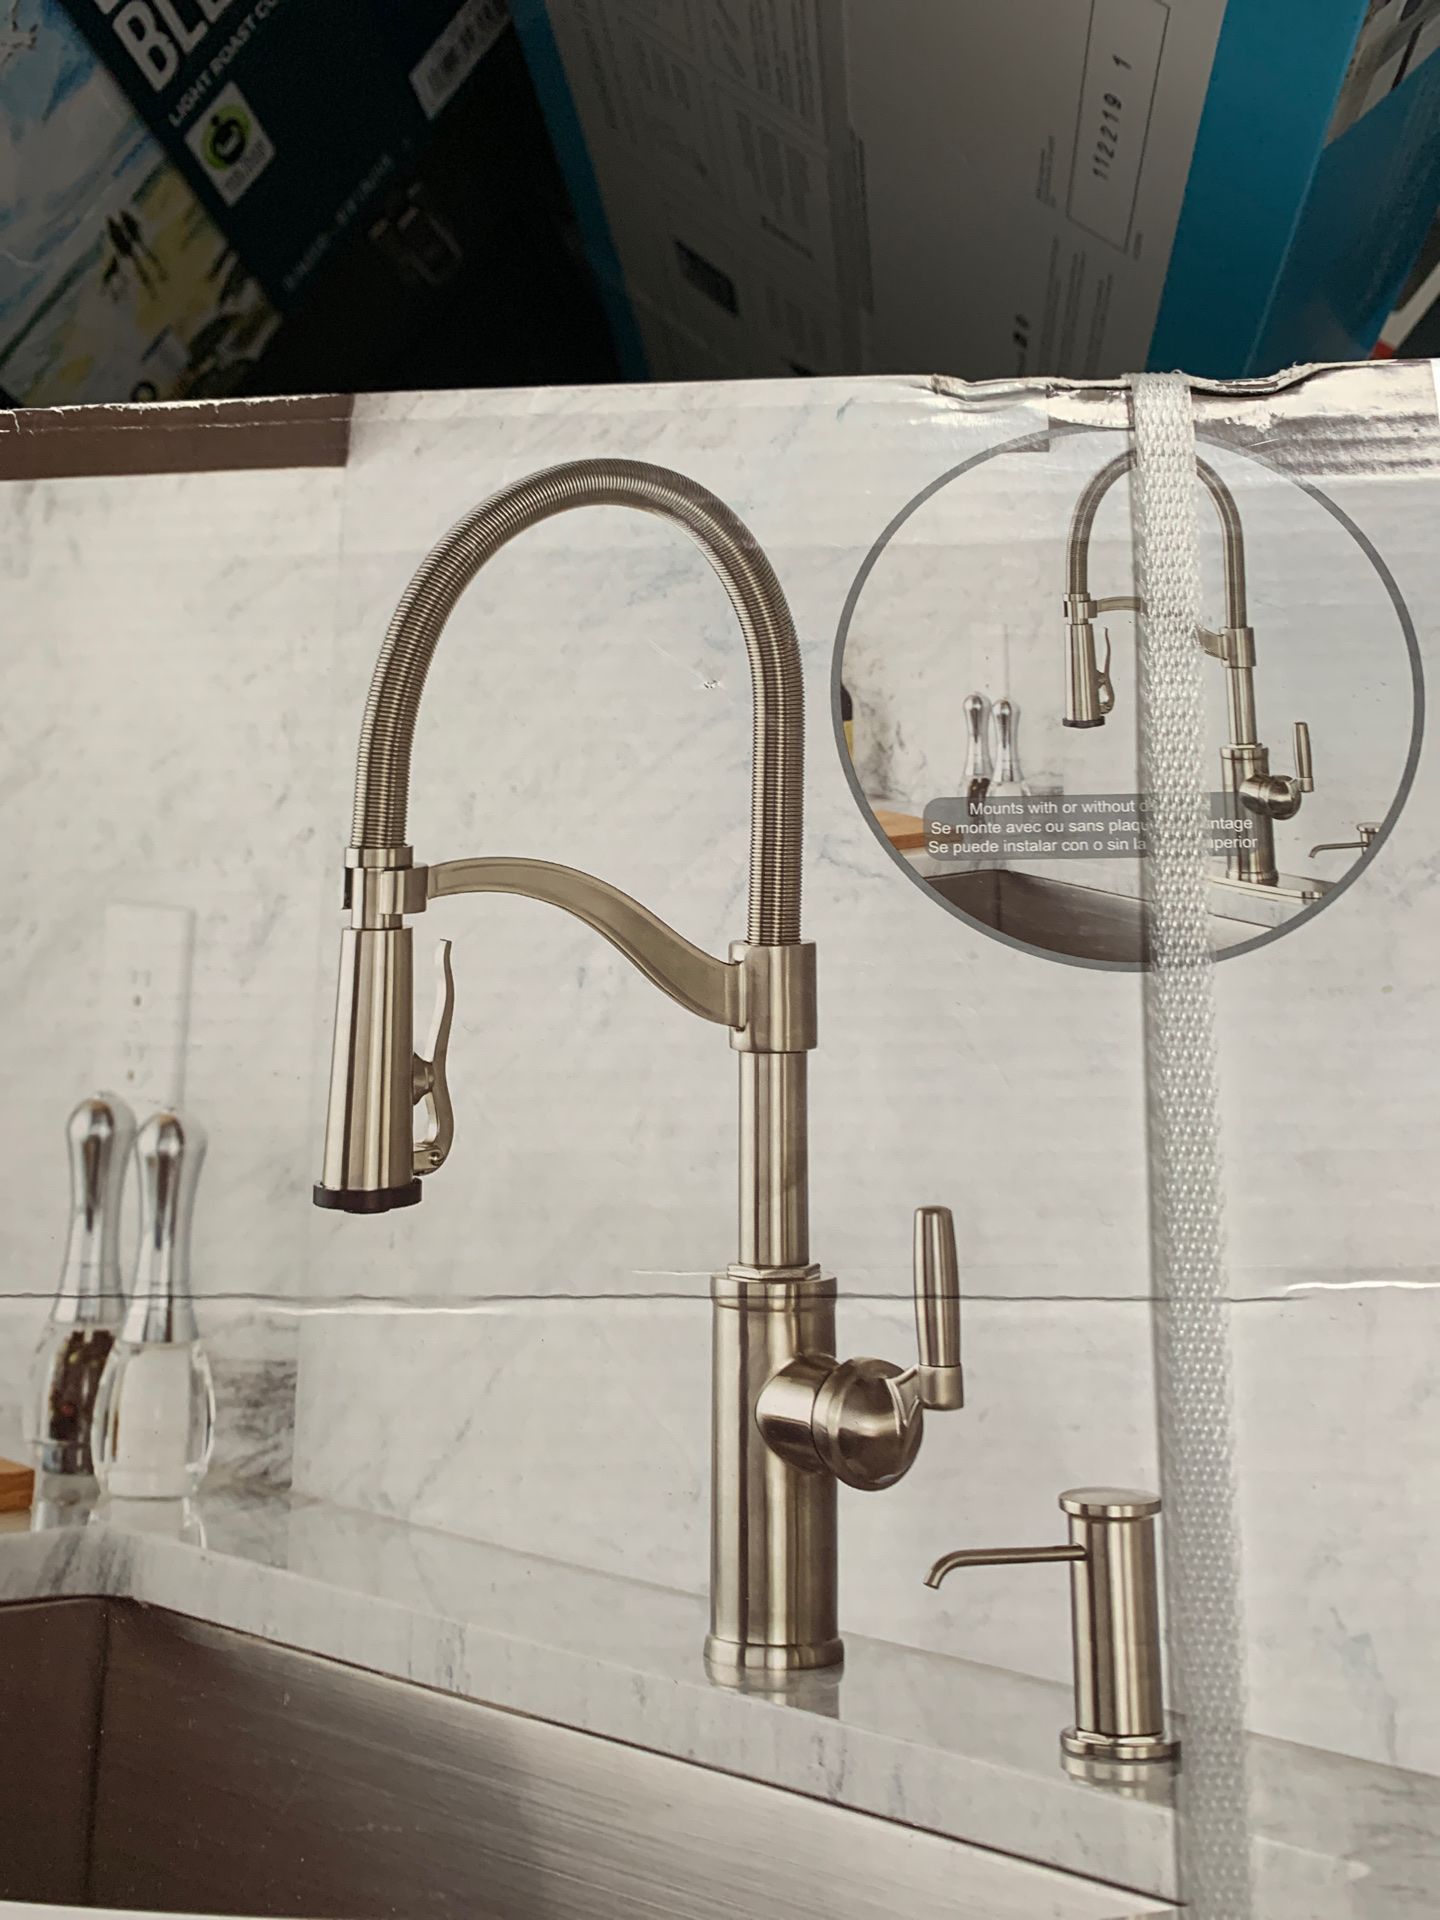 Kitchen faucet brand new cost $290 i want $200